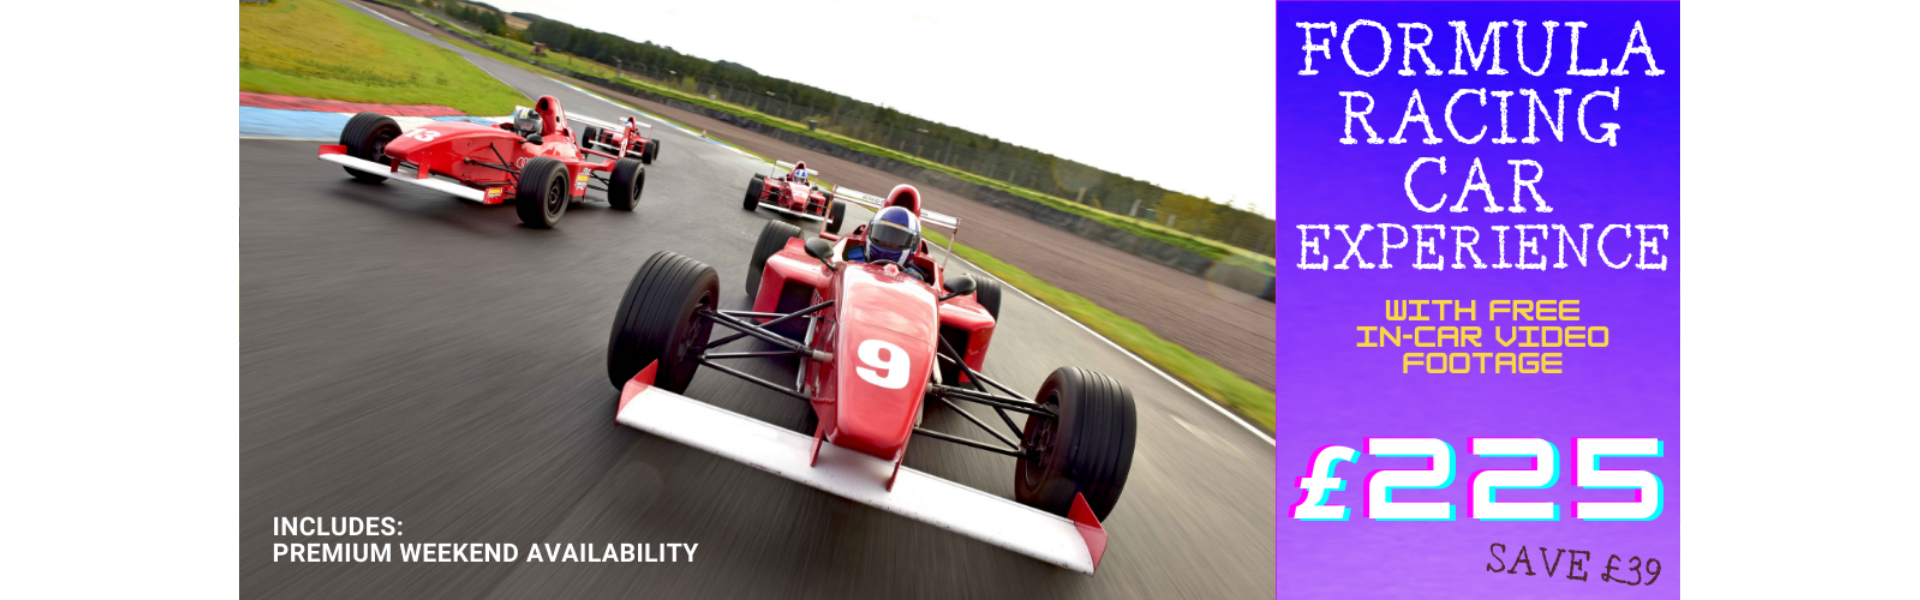 Formula Racing Car Experience with Video offer